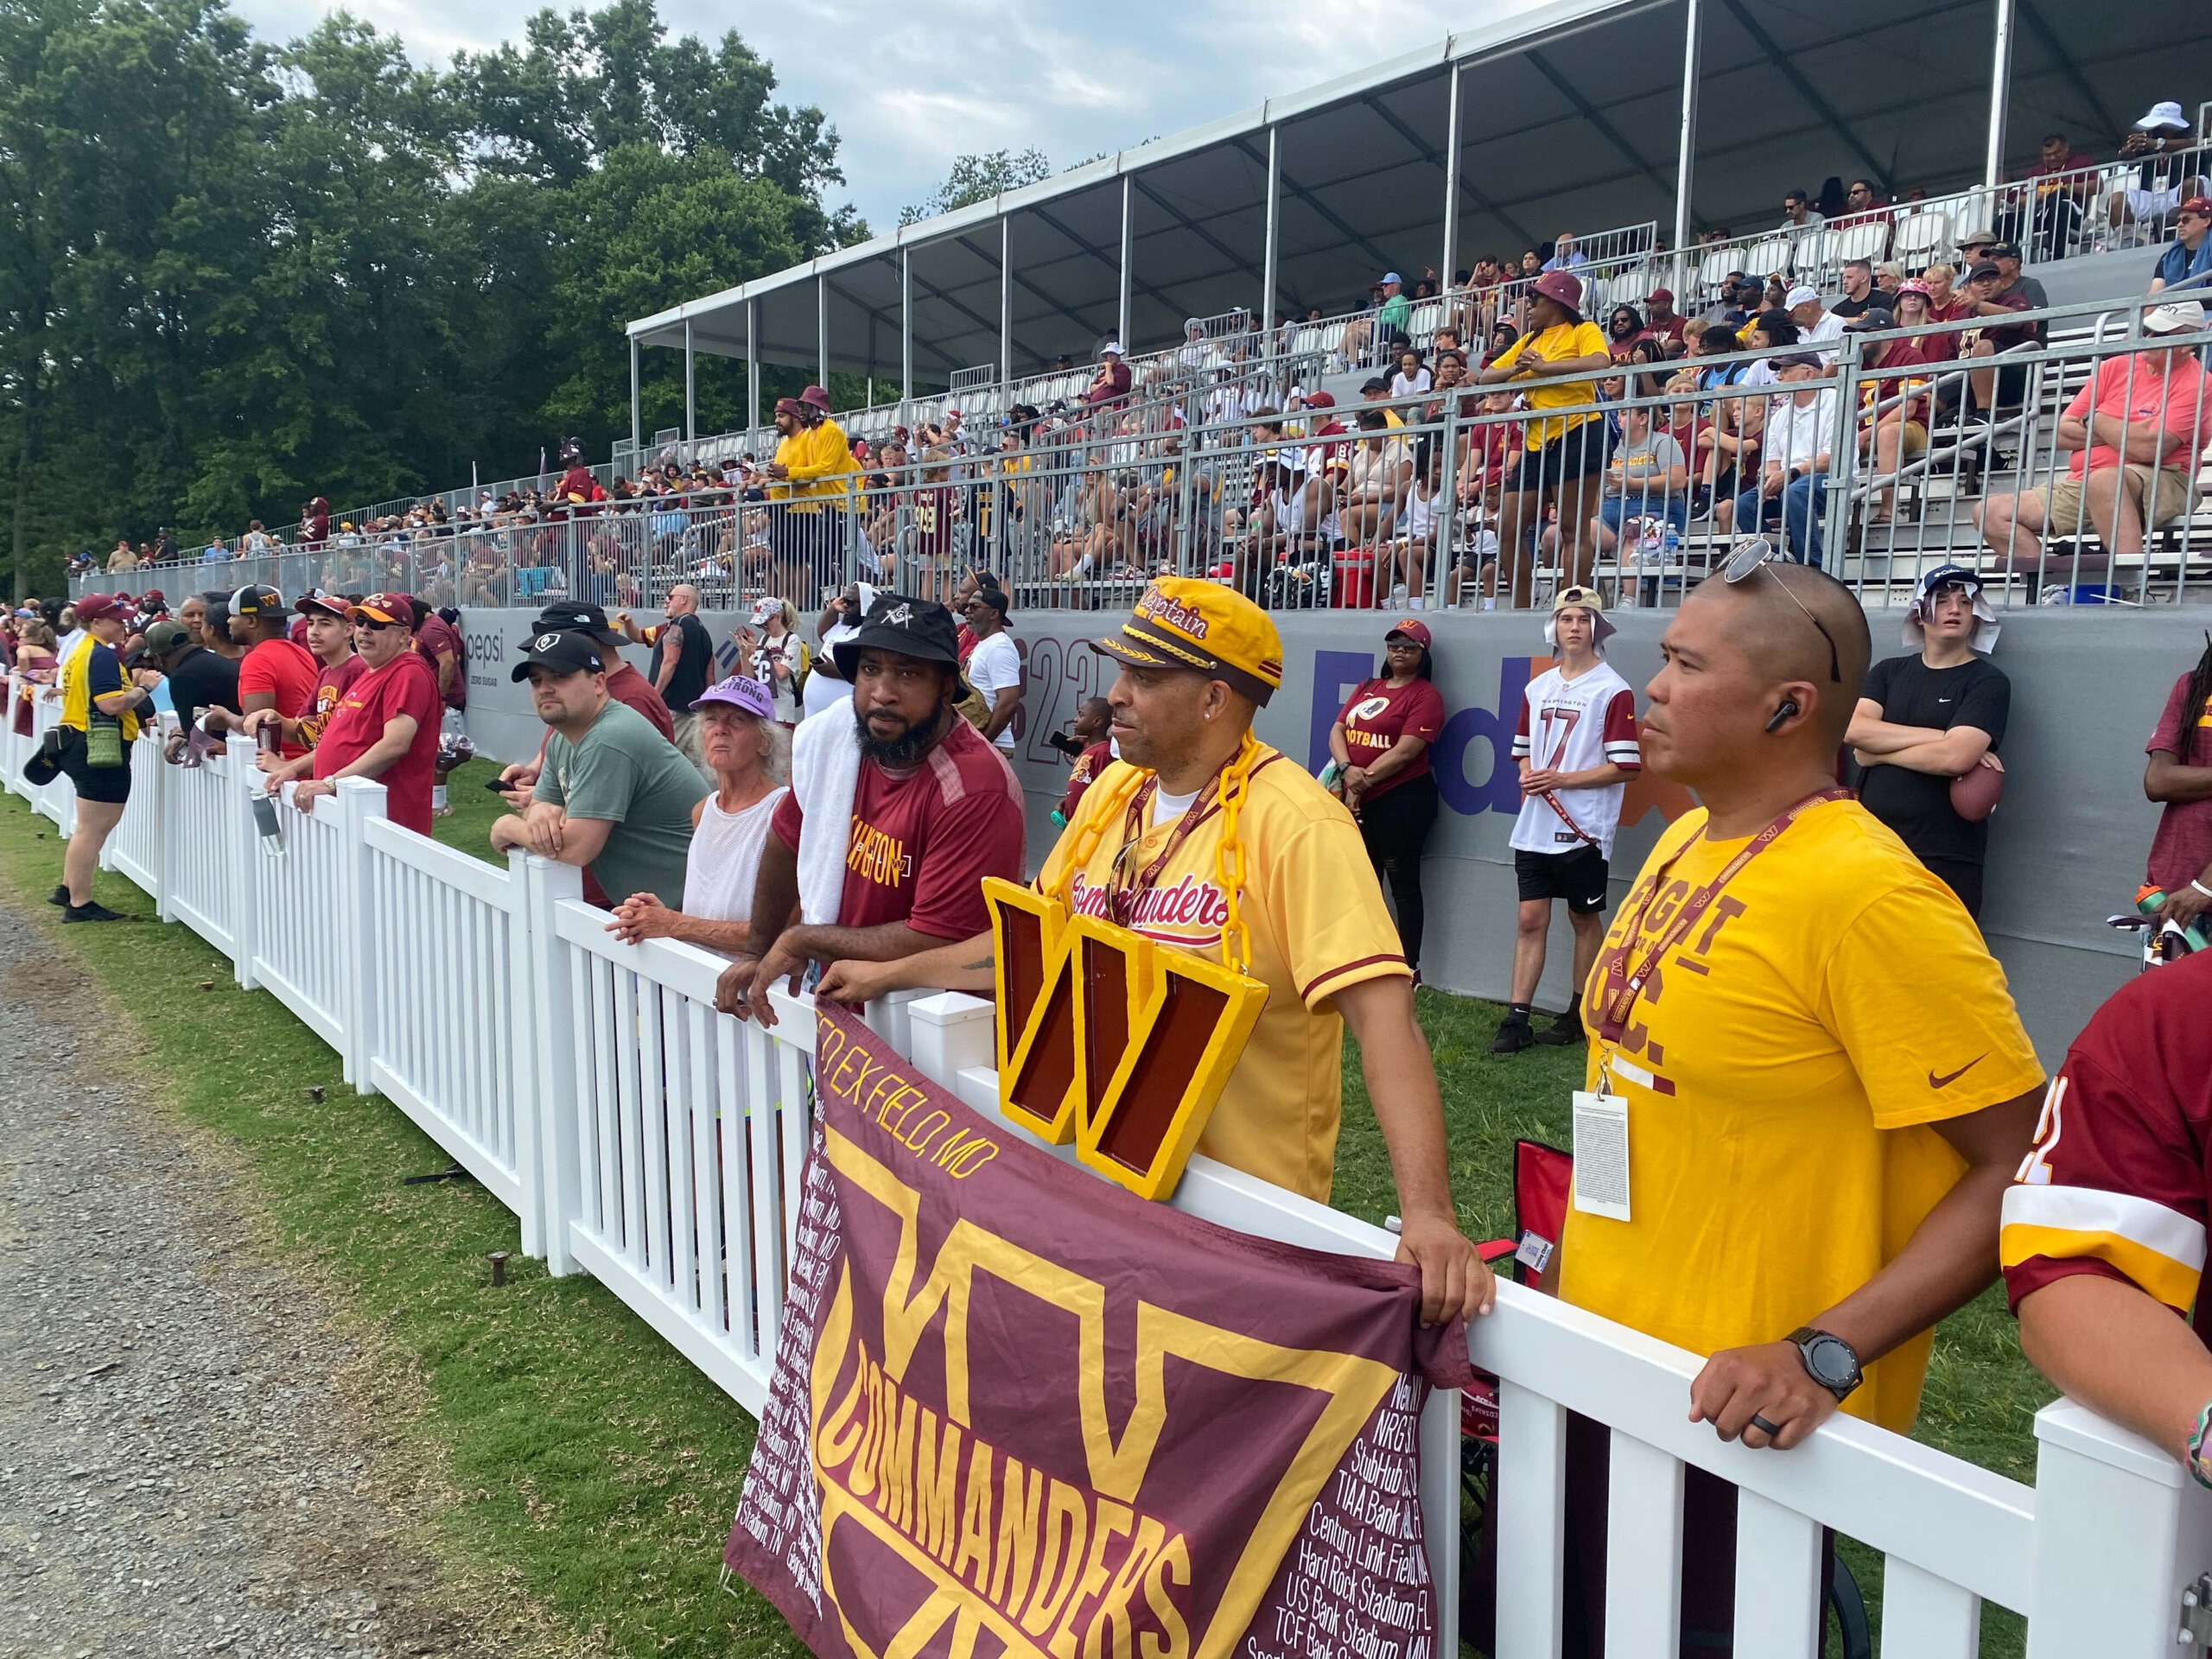 Hopeful crowds pack Commanders training camp on first day of public  attendance: 'Different vibe' - WTOP News